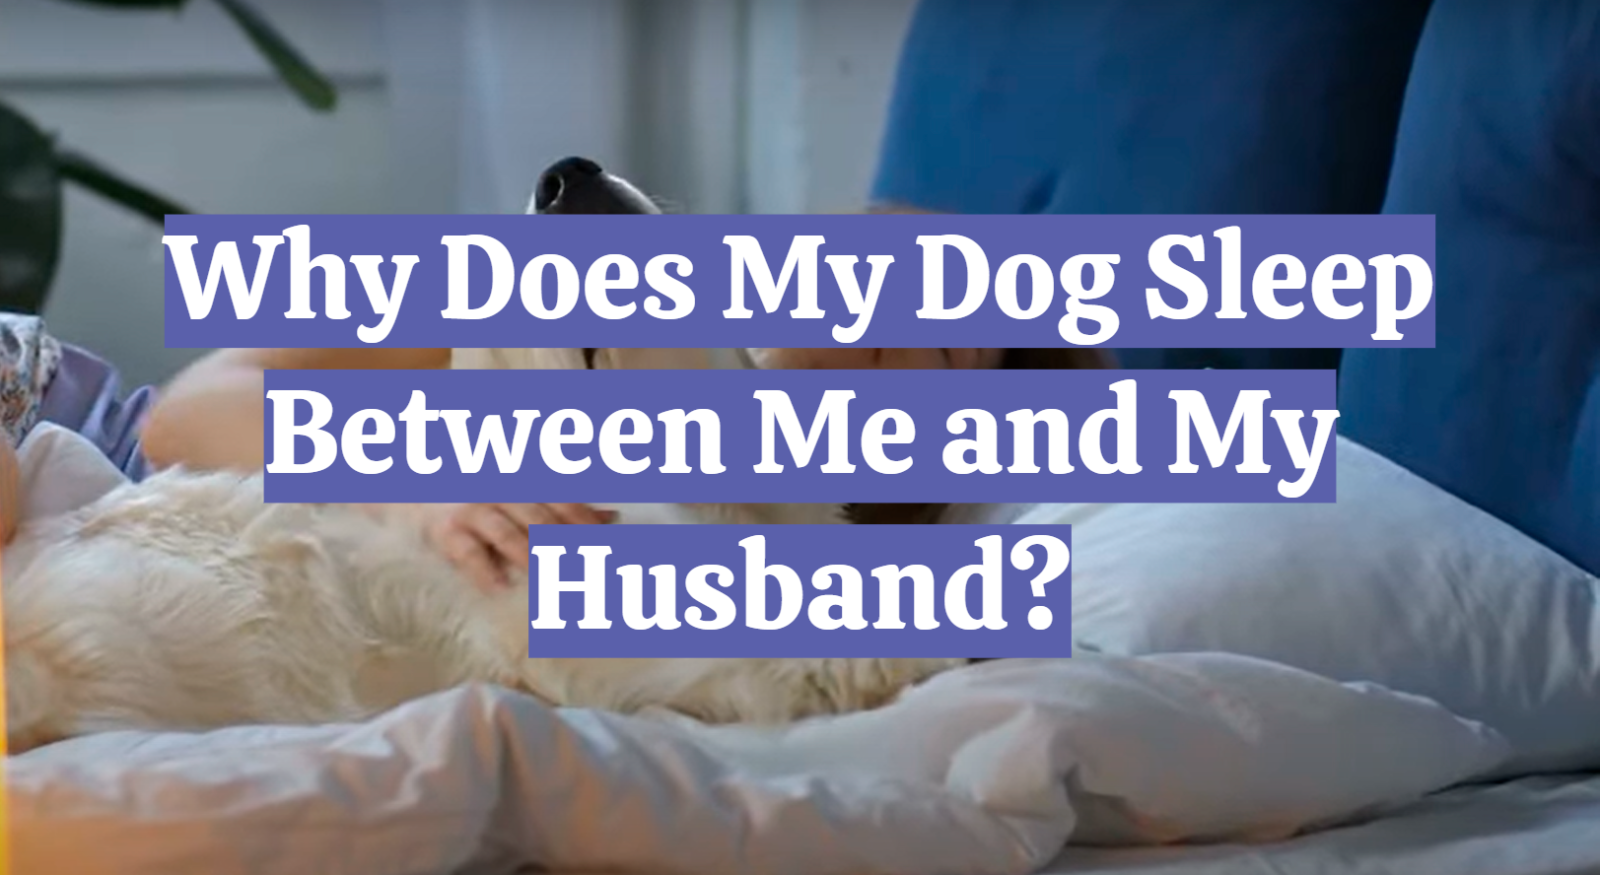 Why Does My Dog Sleep Between Me and My Husband?